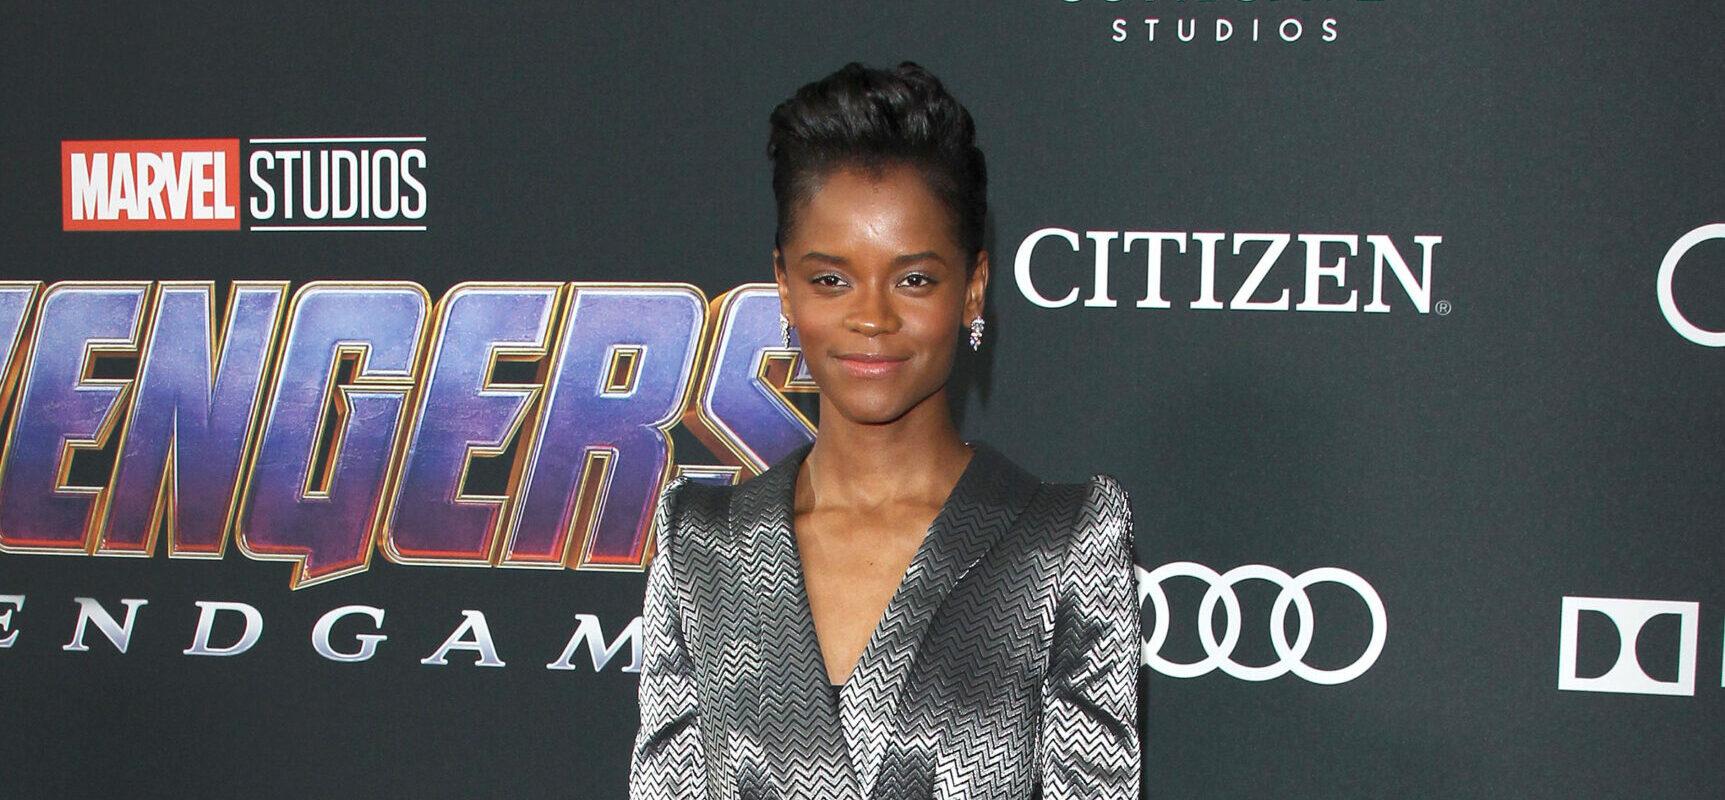 Letitia Wright, Star of Black Panther: Wakanda Forever, at the Avengers Endgame Premiere.